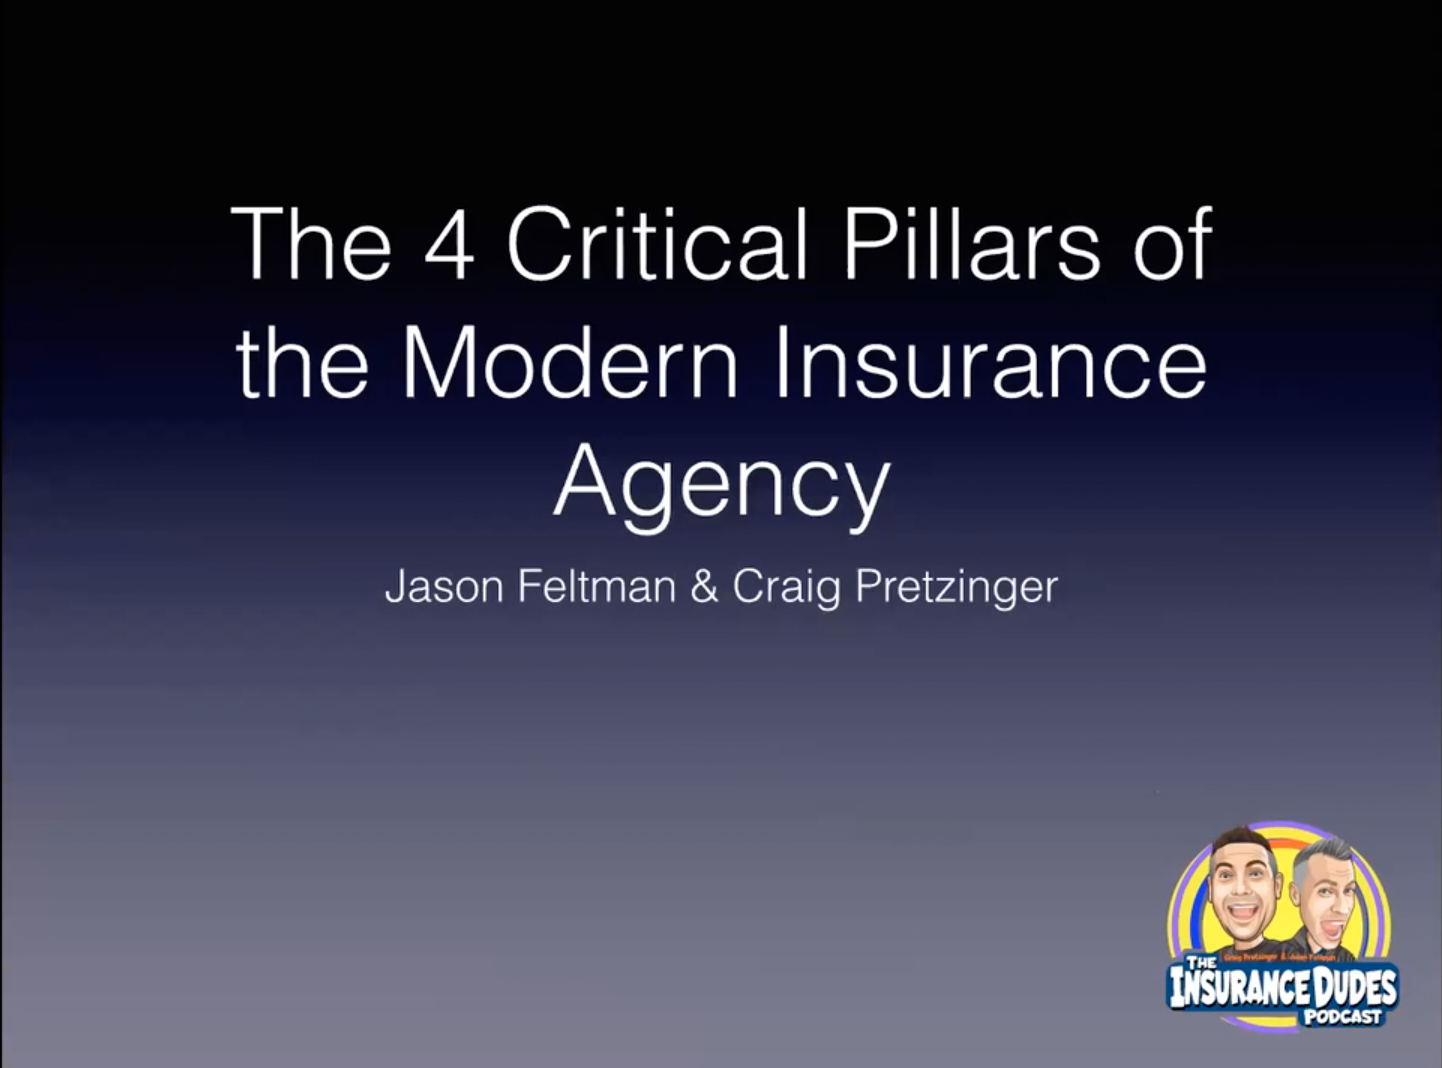 The 4 Critical Pillars of the Modern Insurance Agency with The Insurance Dudes